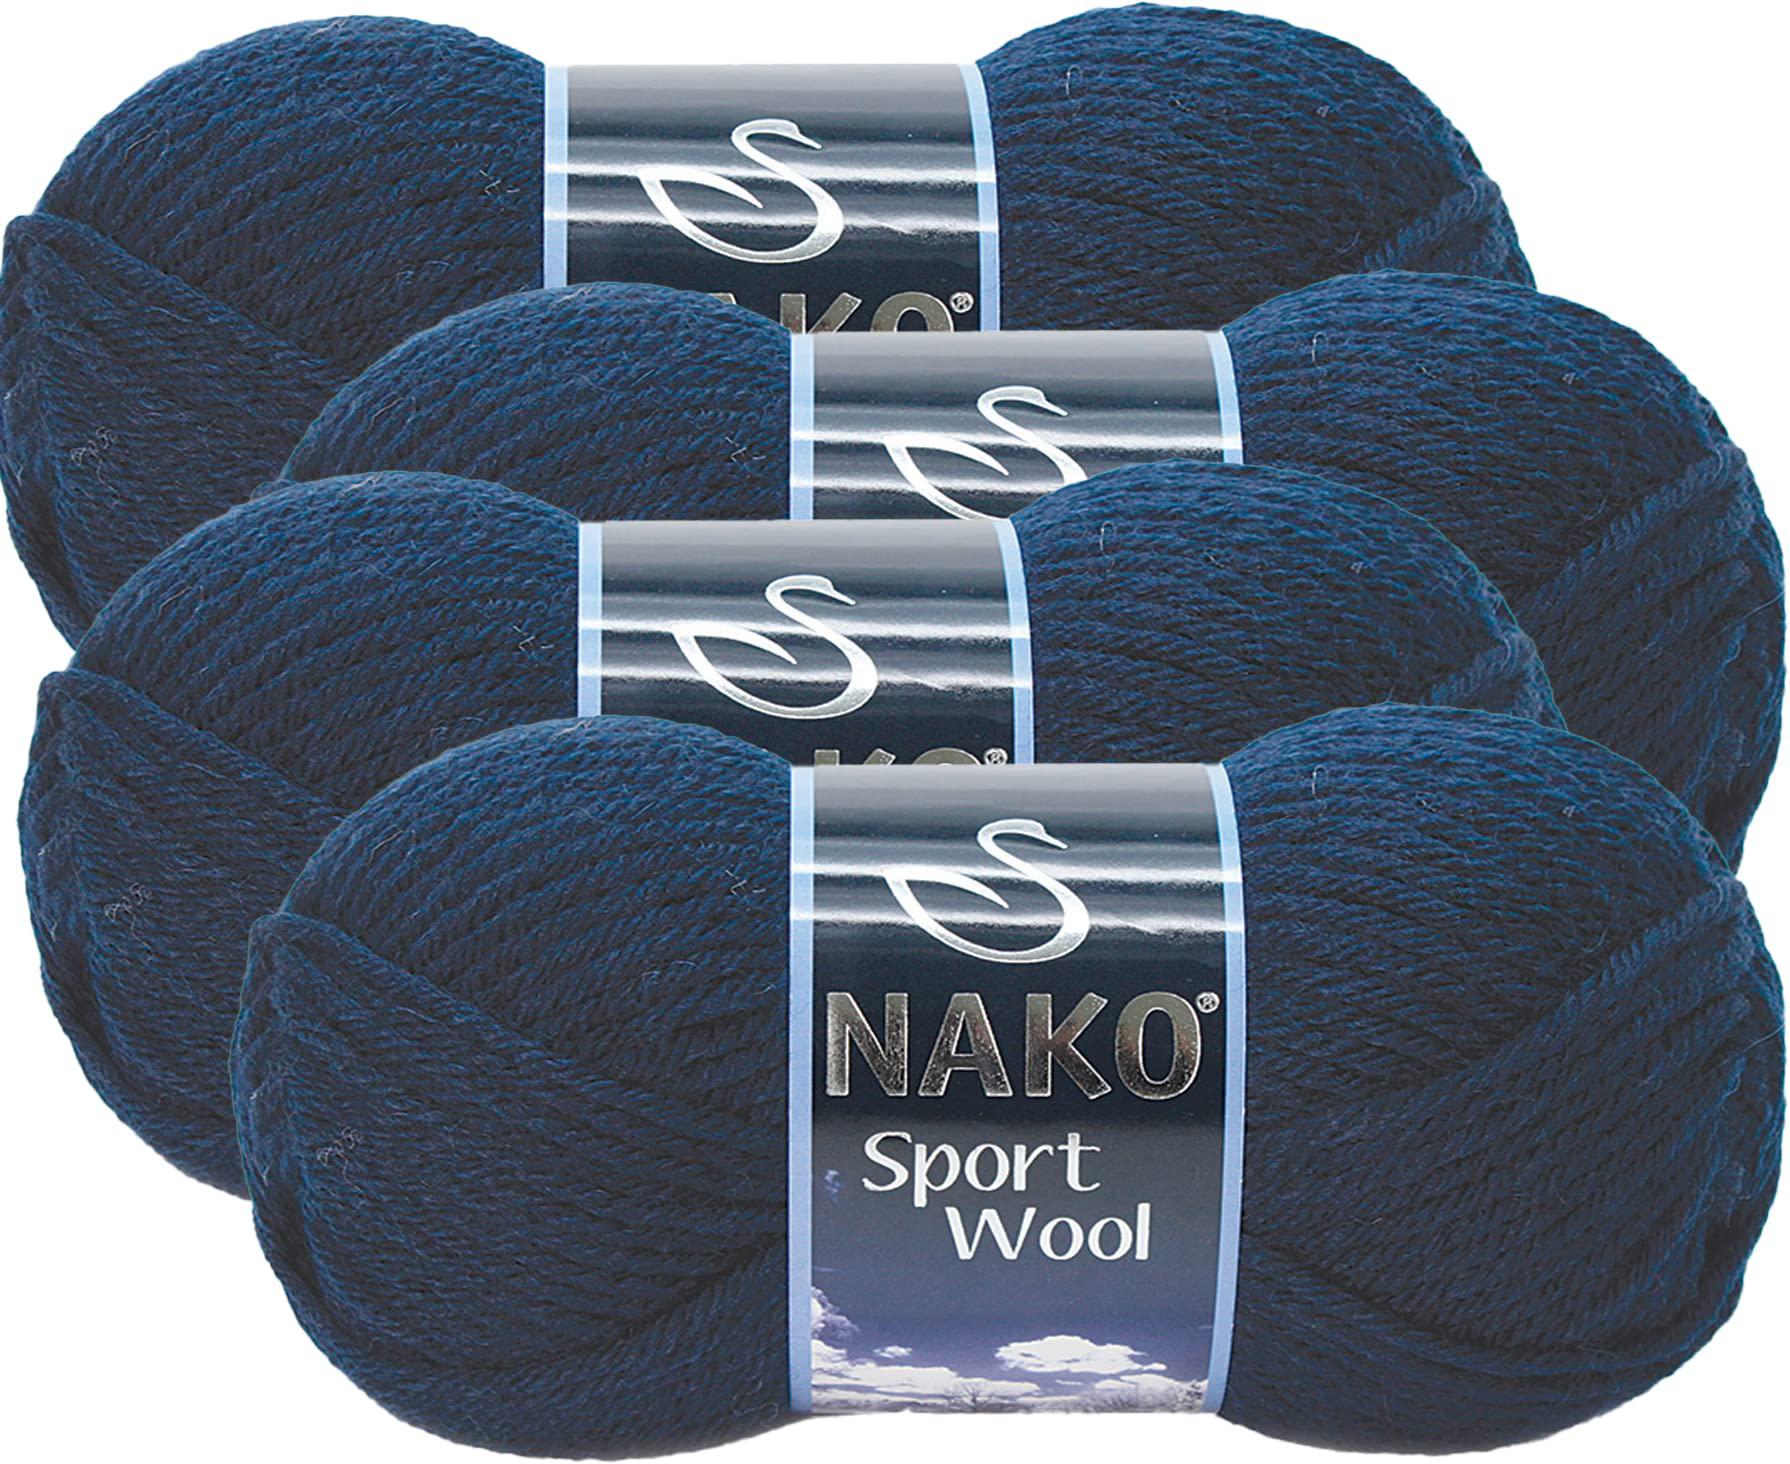 nako sport wool,wool knitting yarn,(4balls) each skein(ball) 3.53 oz (100g),you can use it for knitting scarves, berets, card